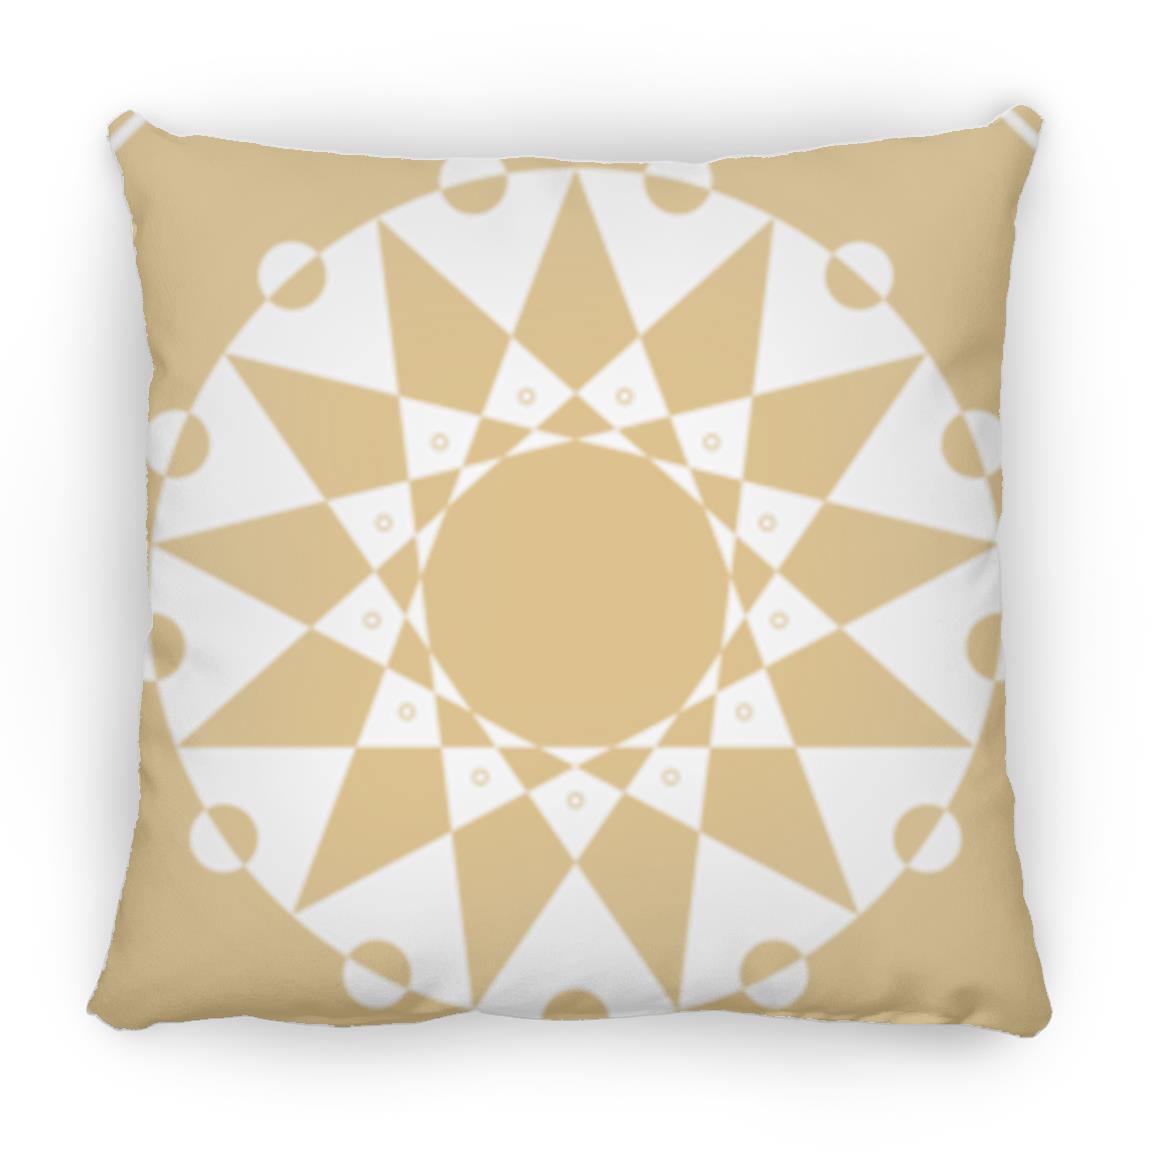 Crop Circle Pillow - West Stowell - Shapes of Wisdom